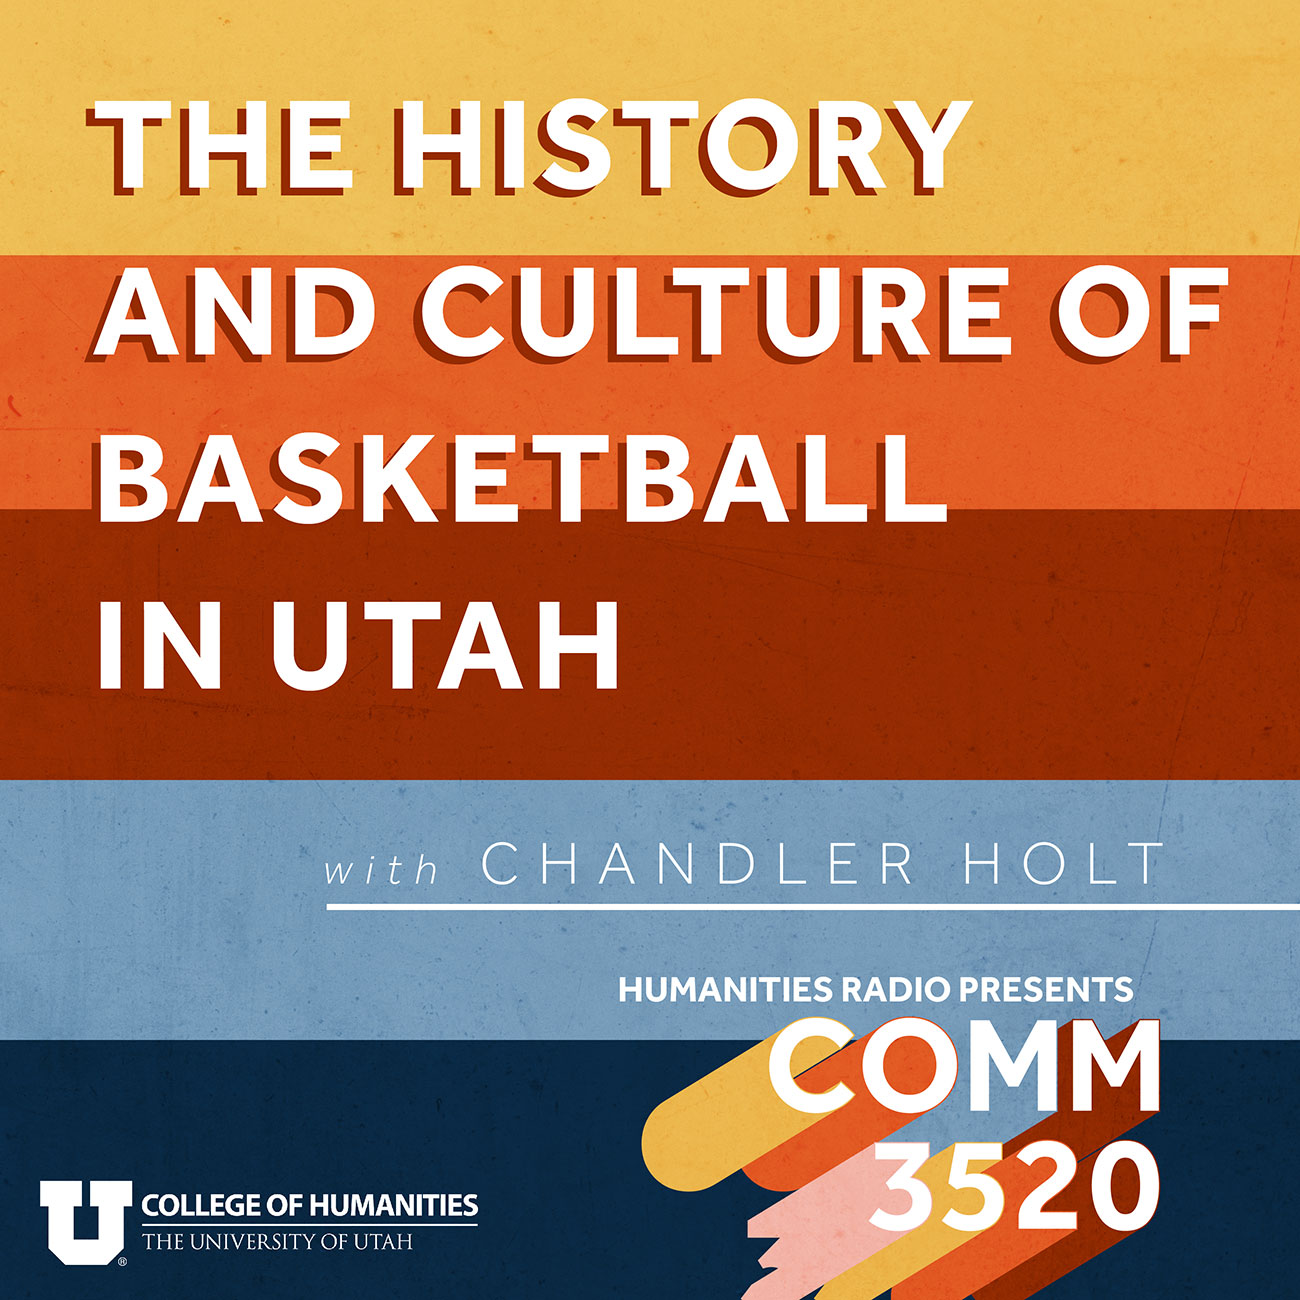 The History and Culture of Basketball in Utah